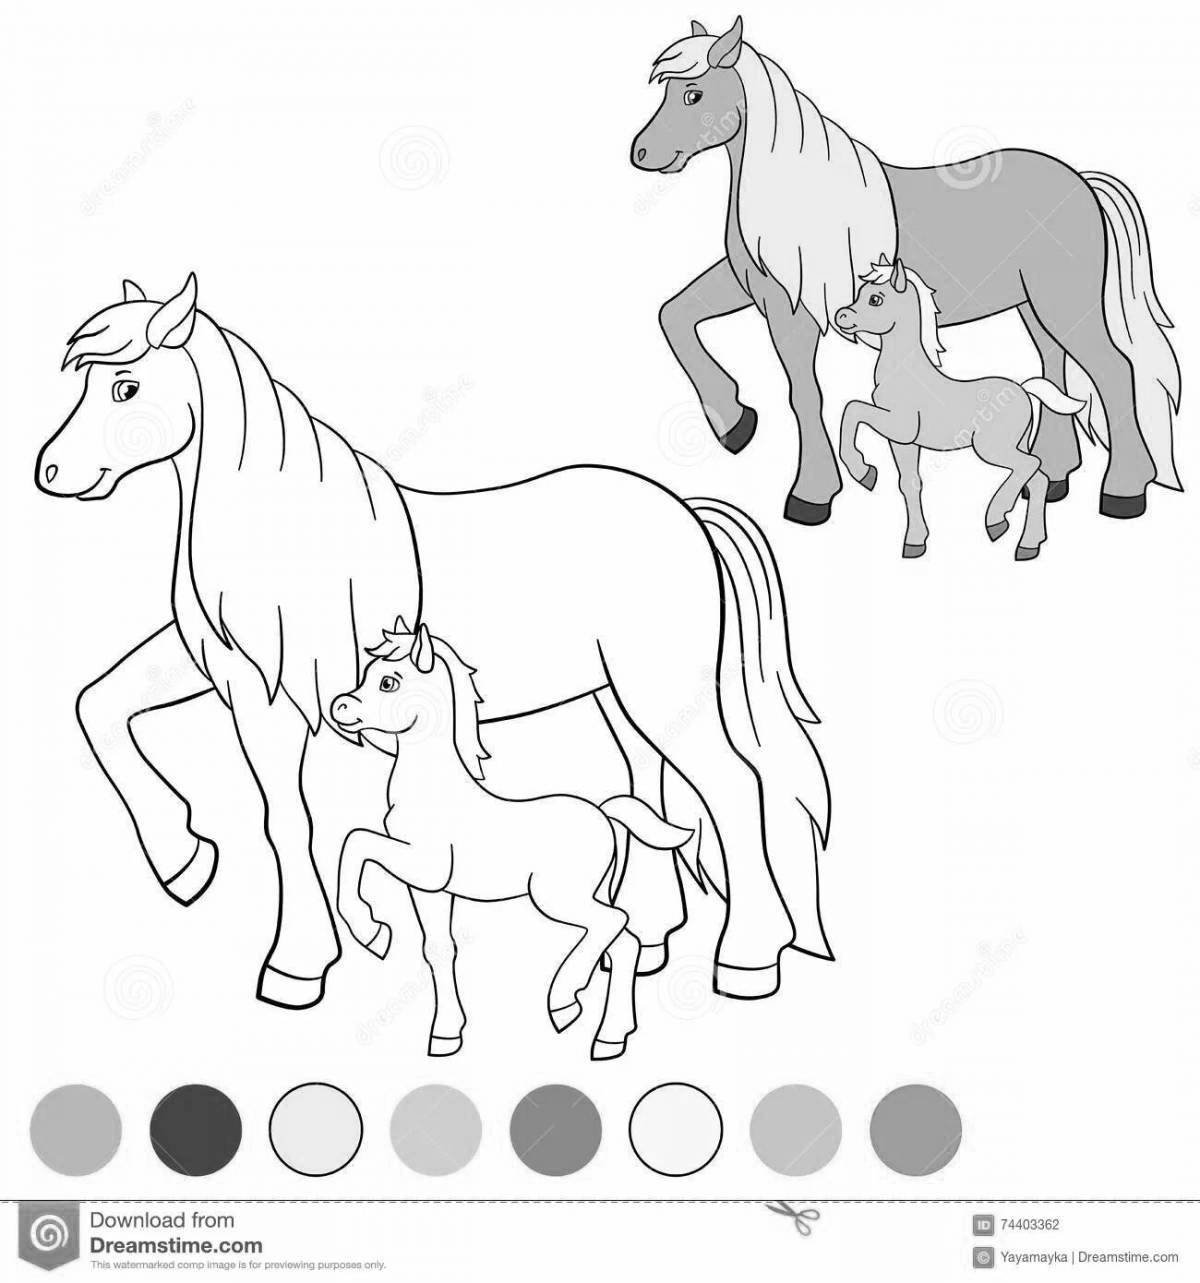 Playful coloring of horses grazing